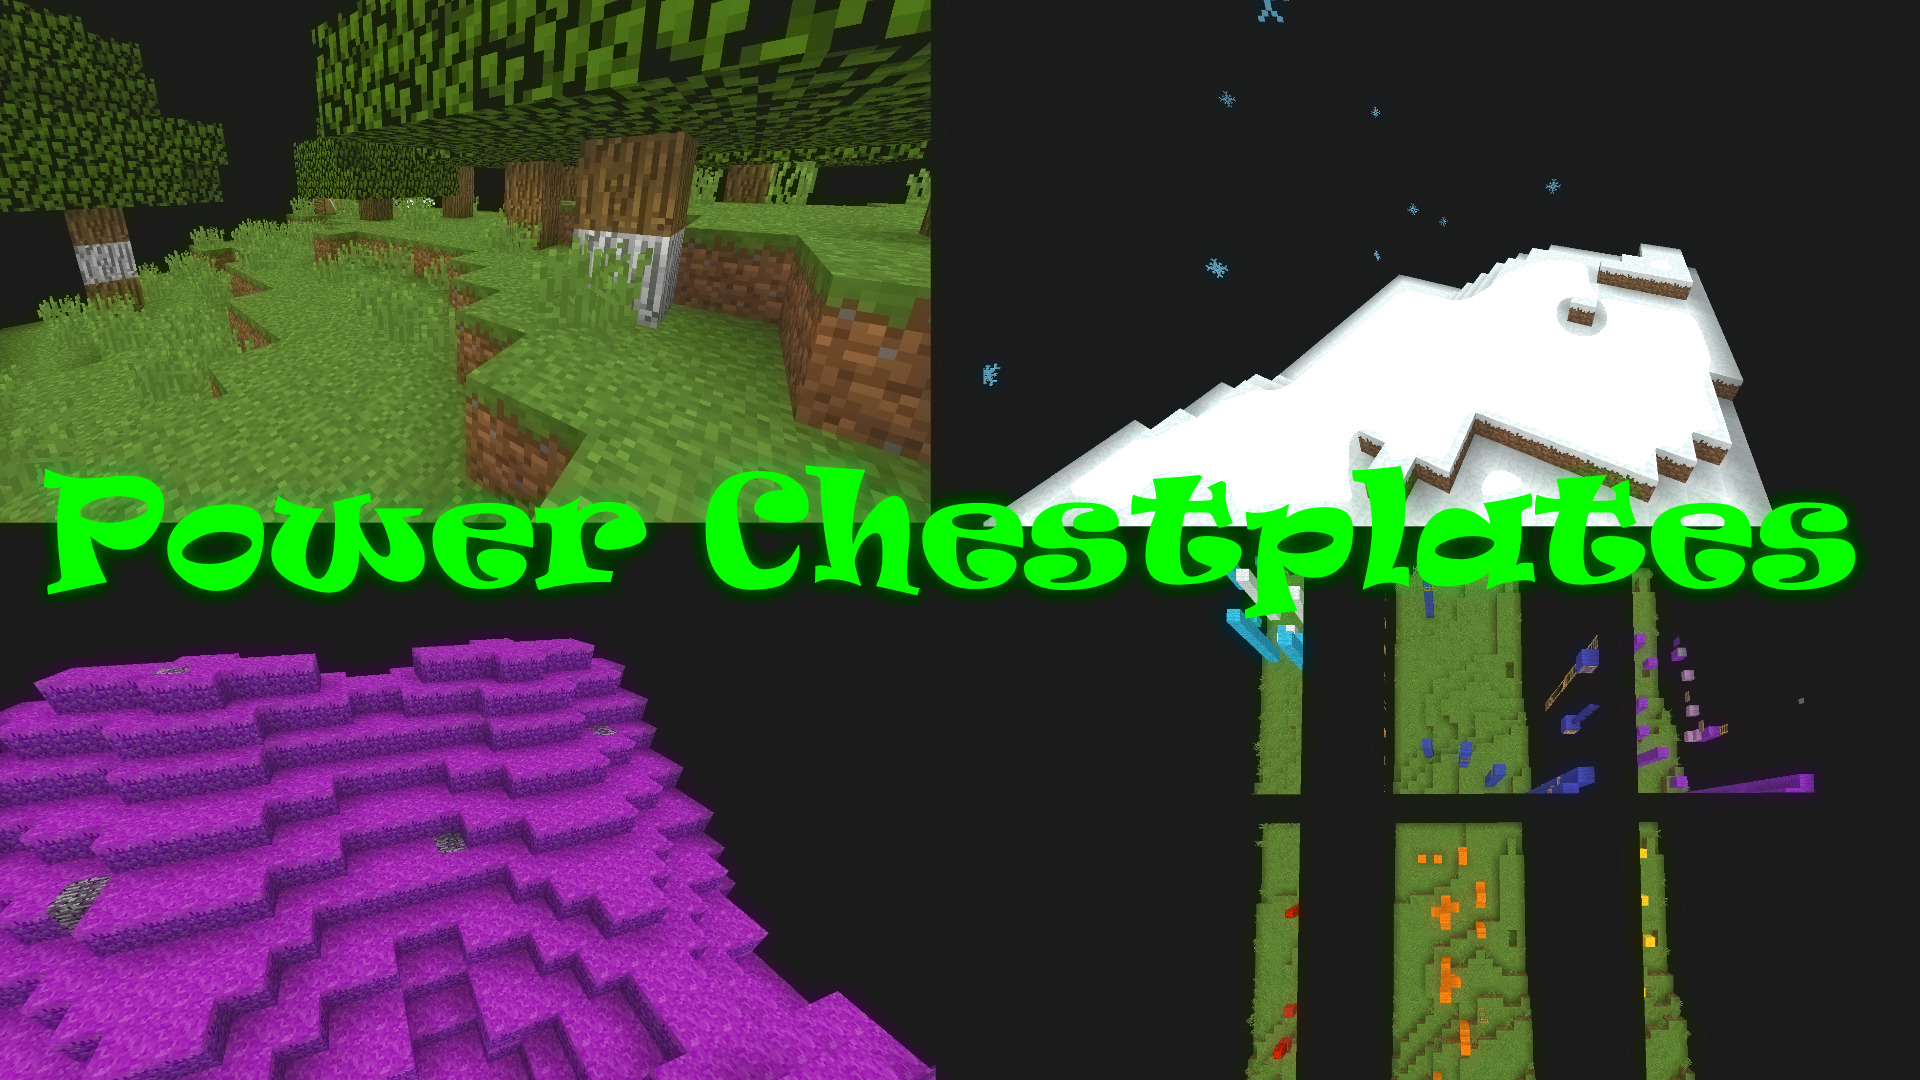 Download Power Chestplates for Minecraft 1.13.2